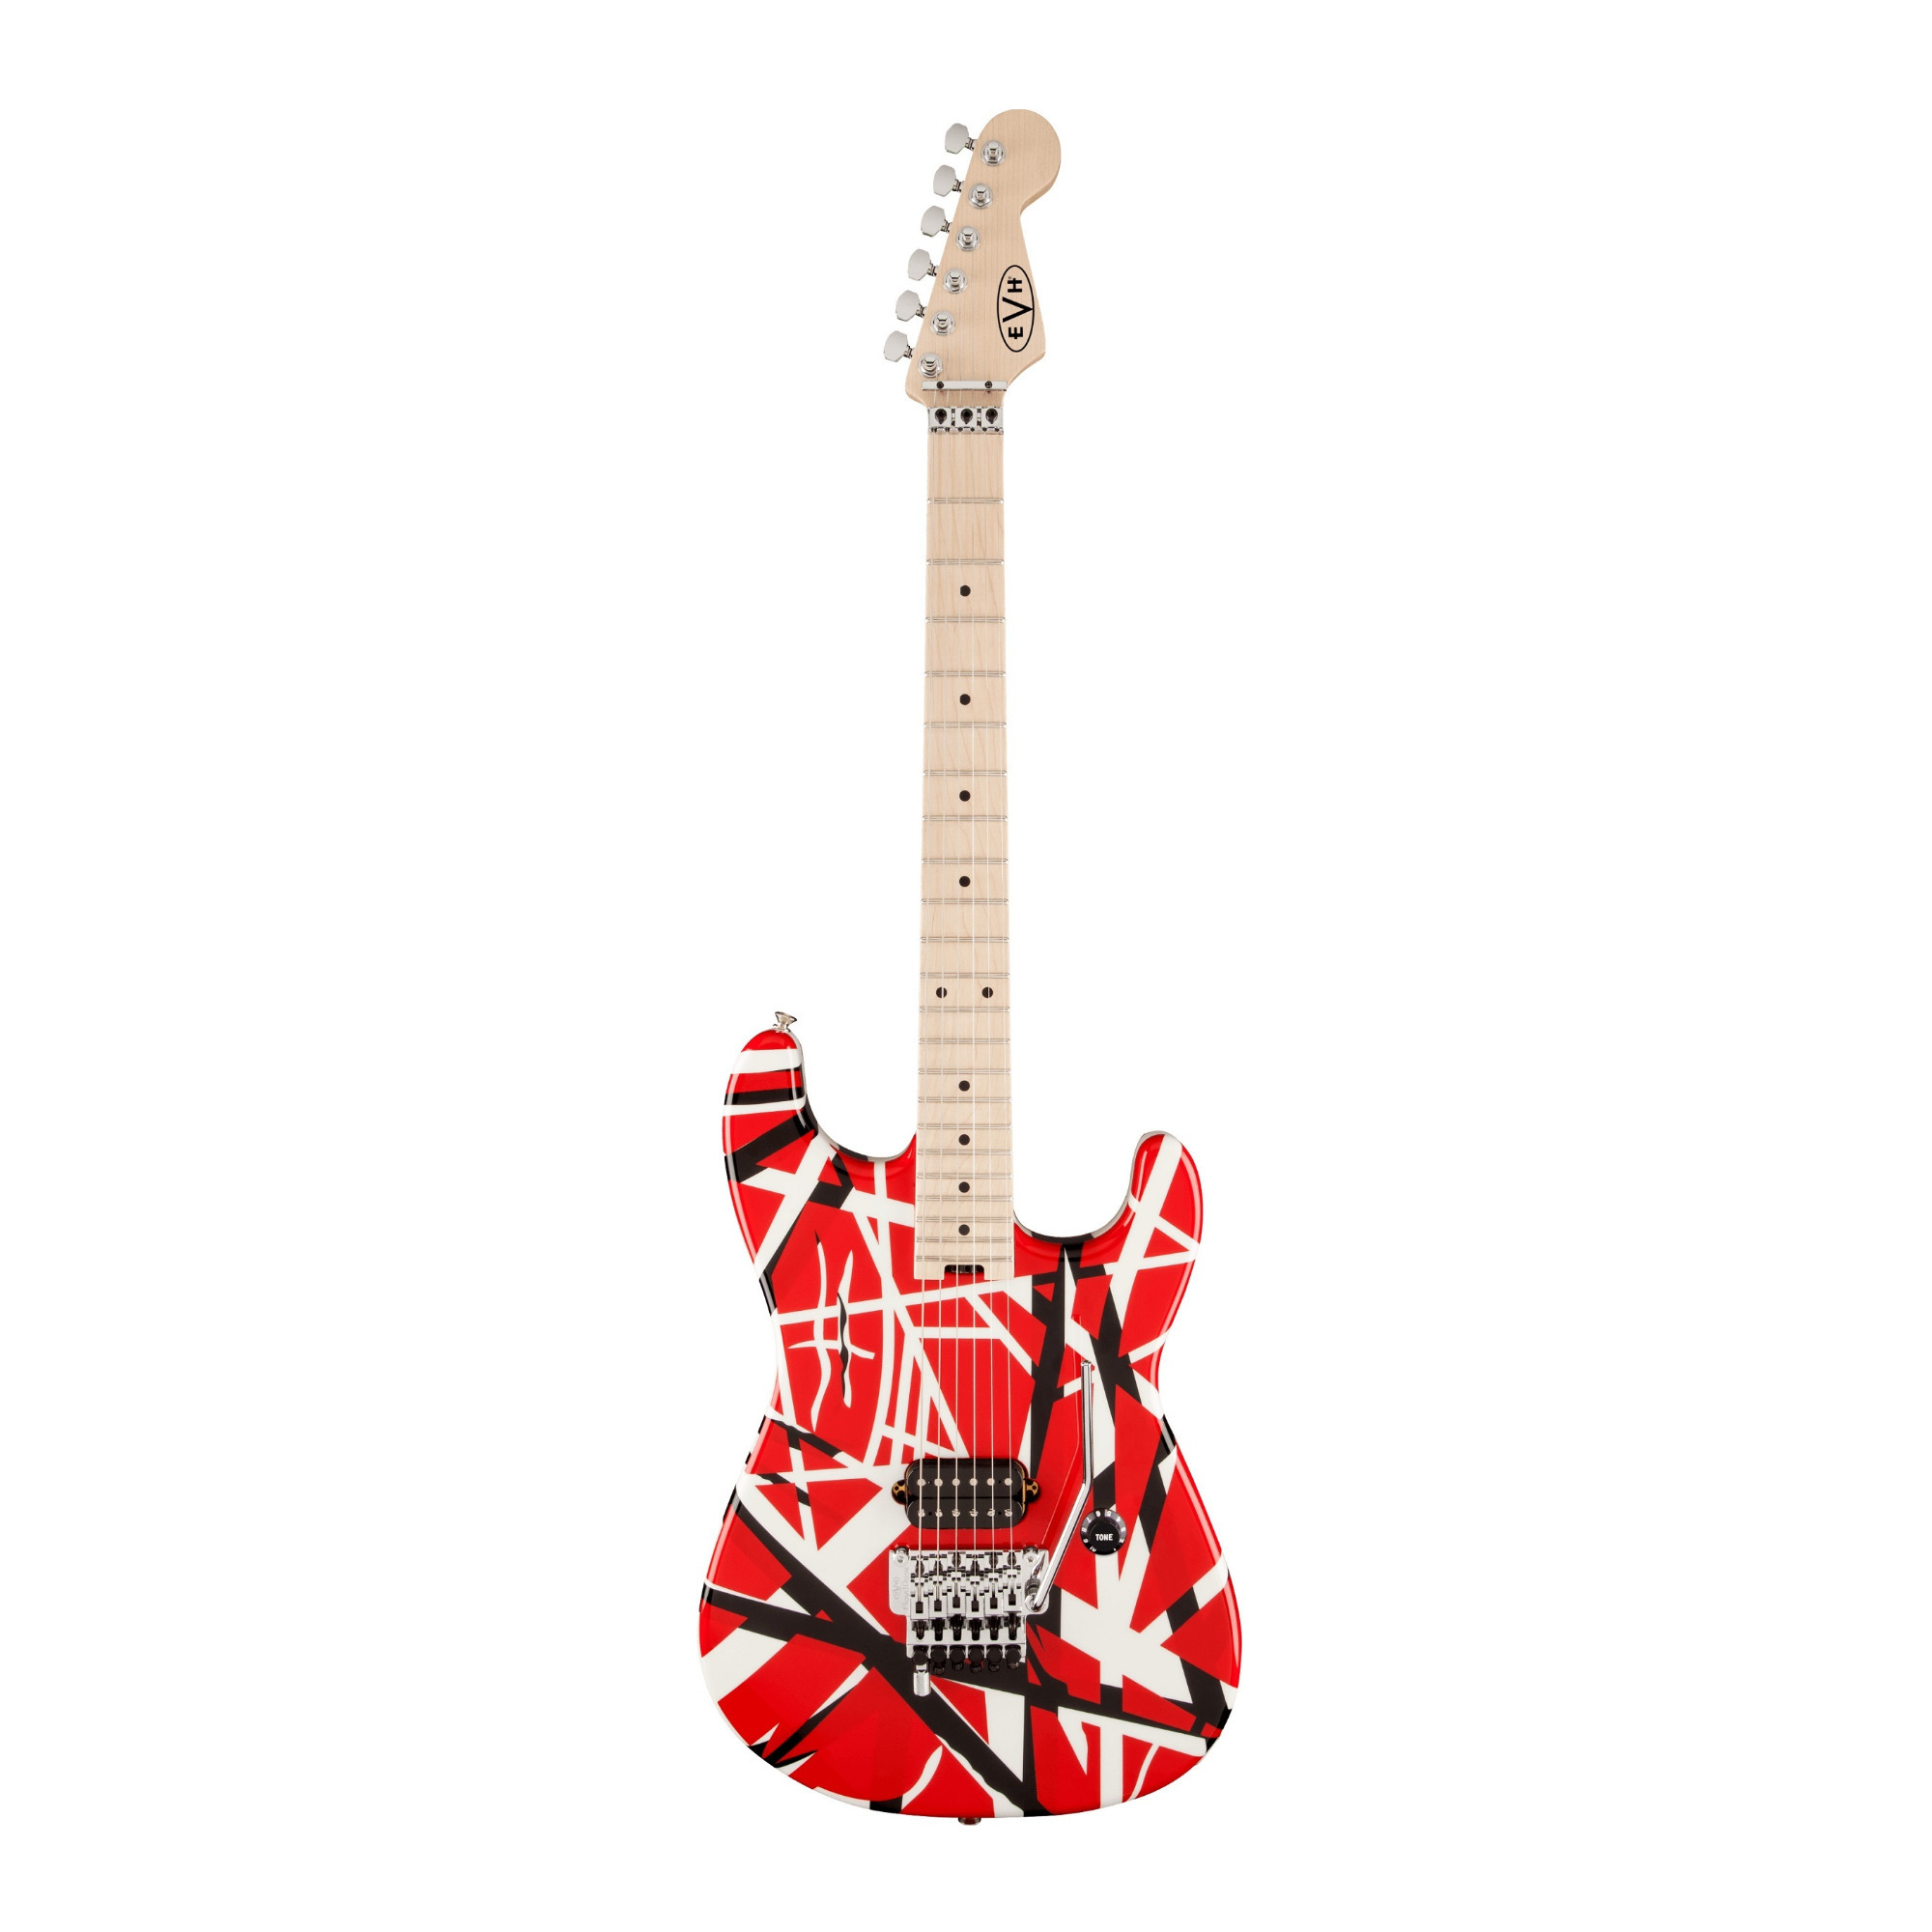 EVH Striped Series High Performance 6-String Electric Guitar (Right-Handed, Red with Black Stripes) in Red/Black -  5107902503